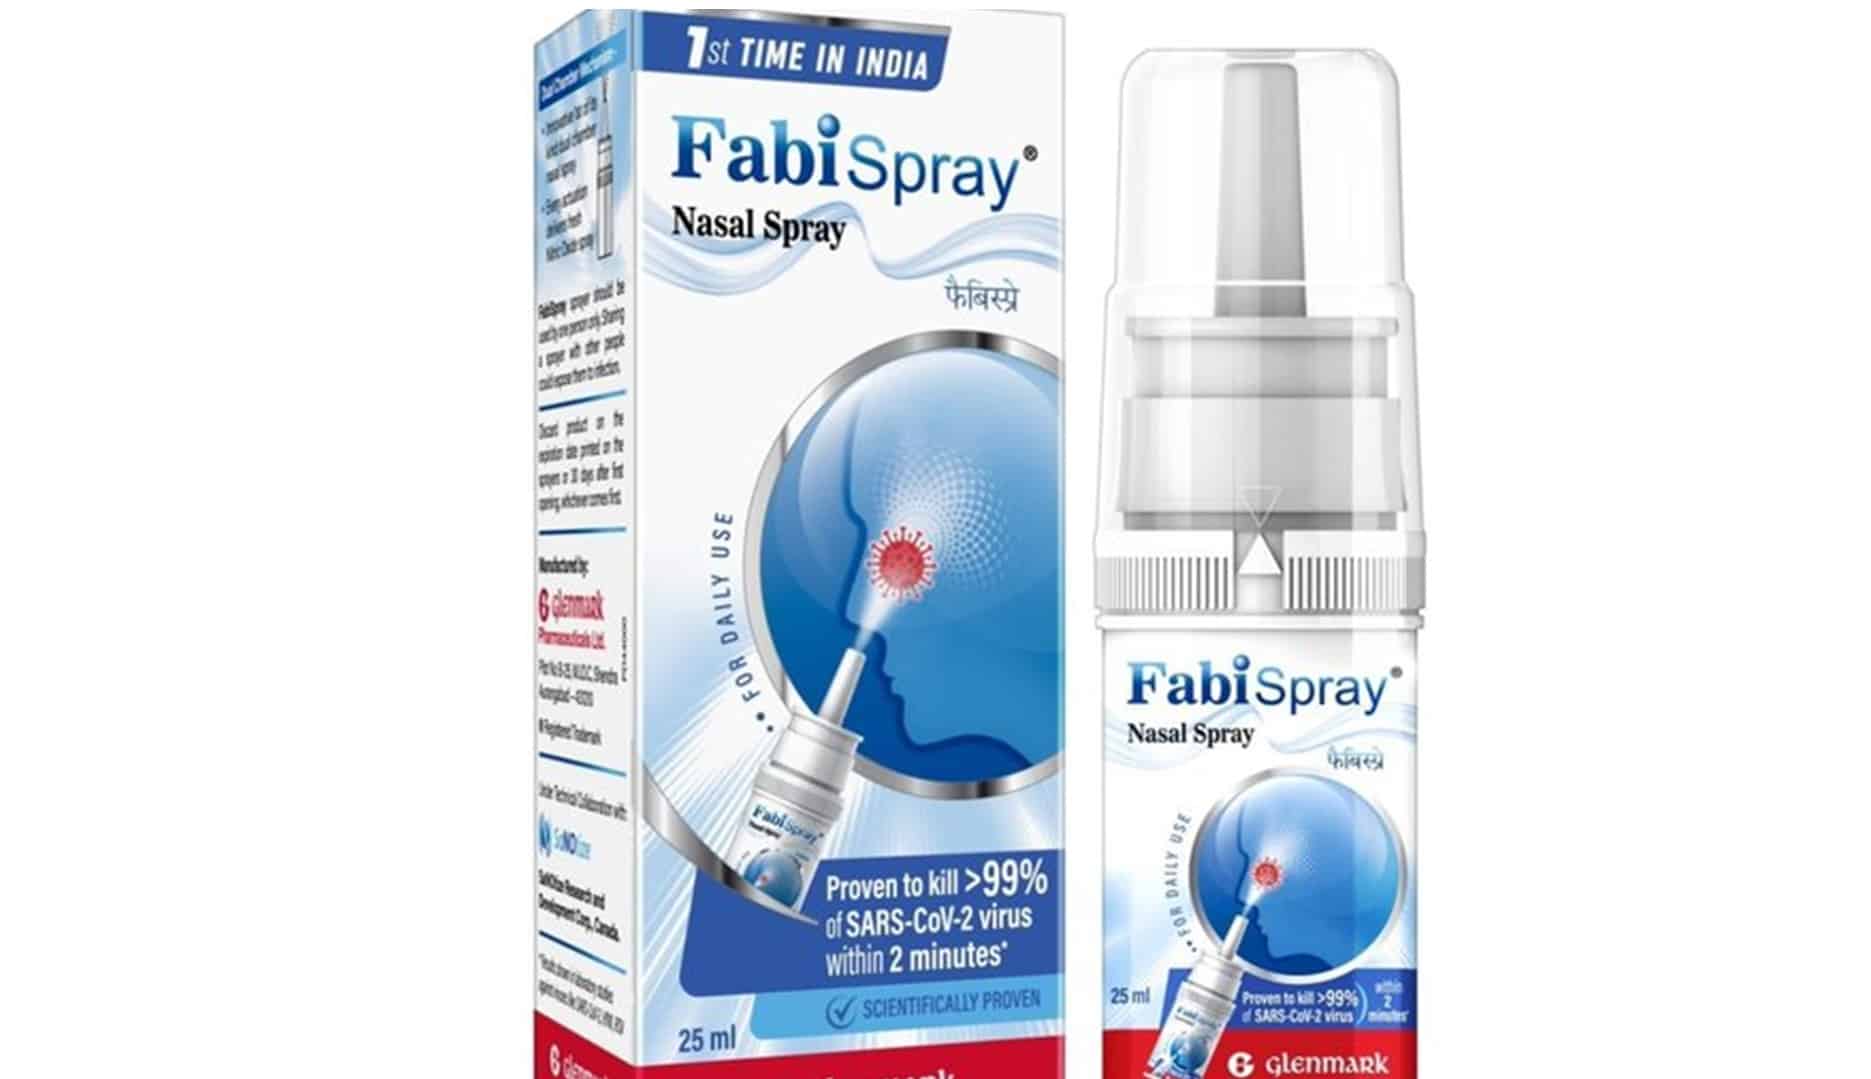 First nasal spray for Covid-19 treatment launched. All you need to know